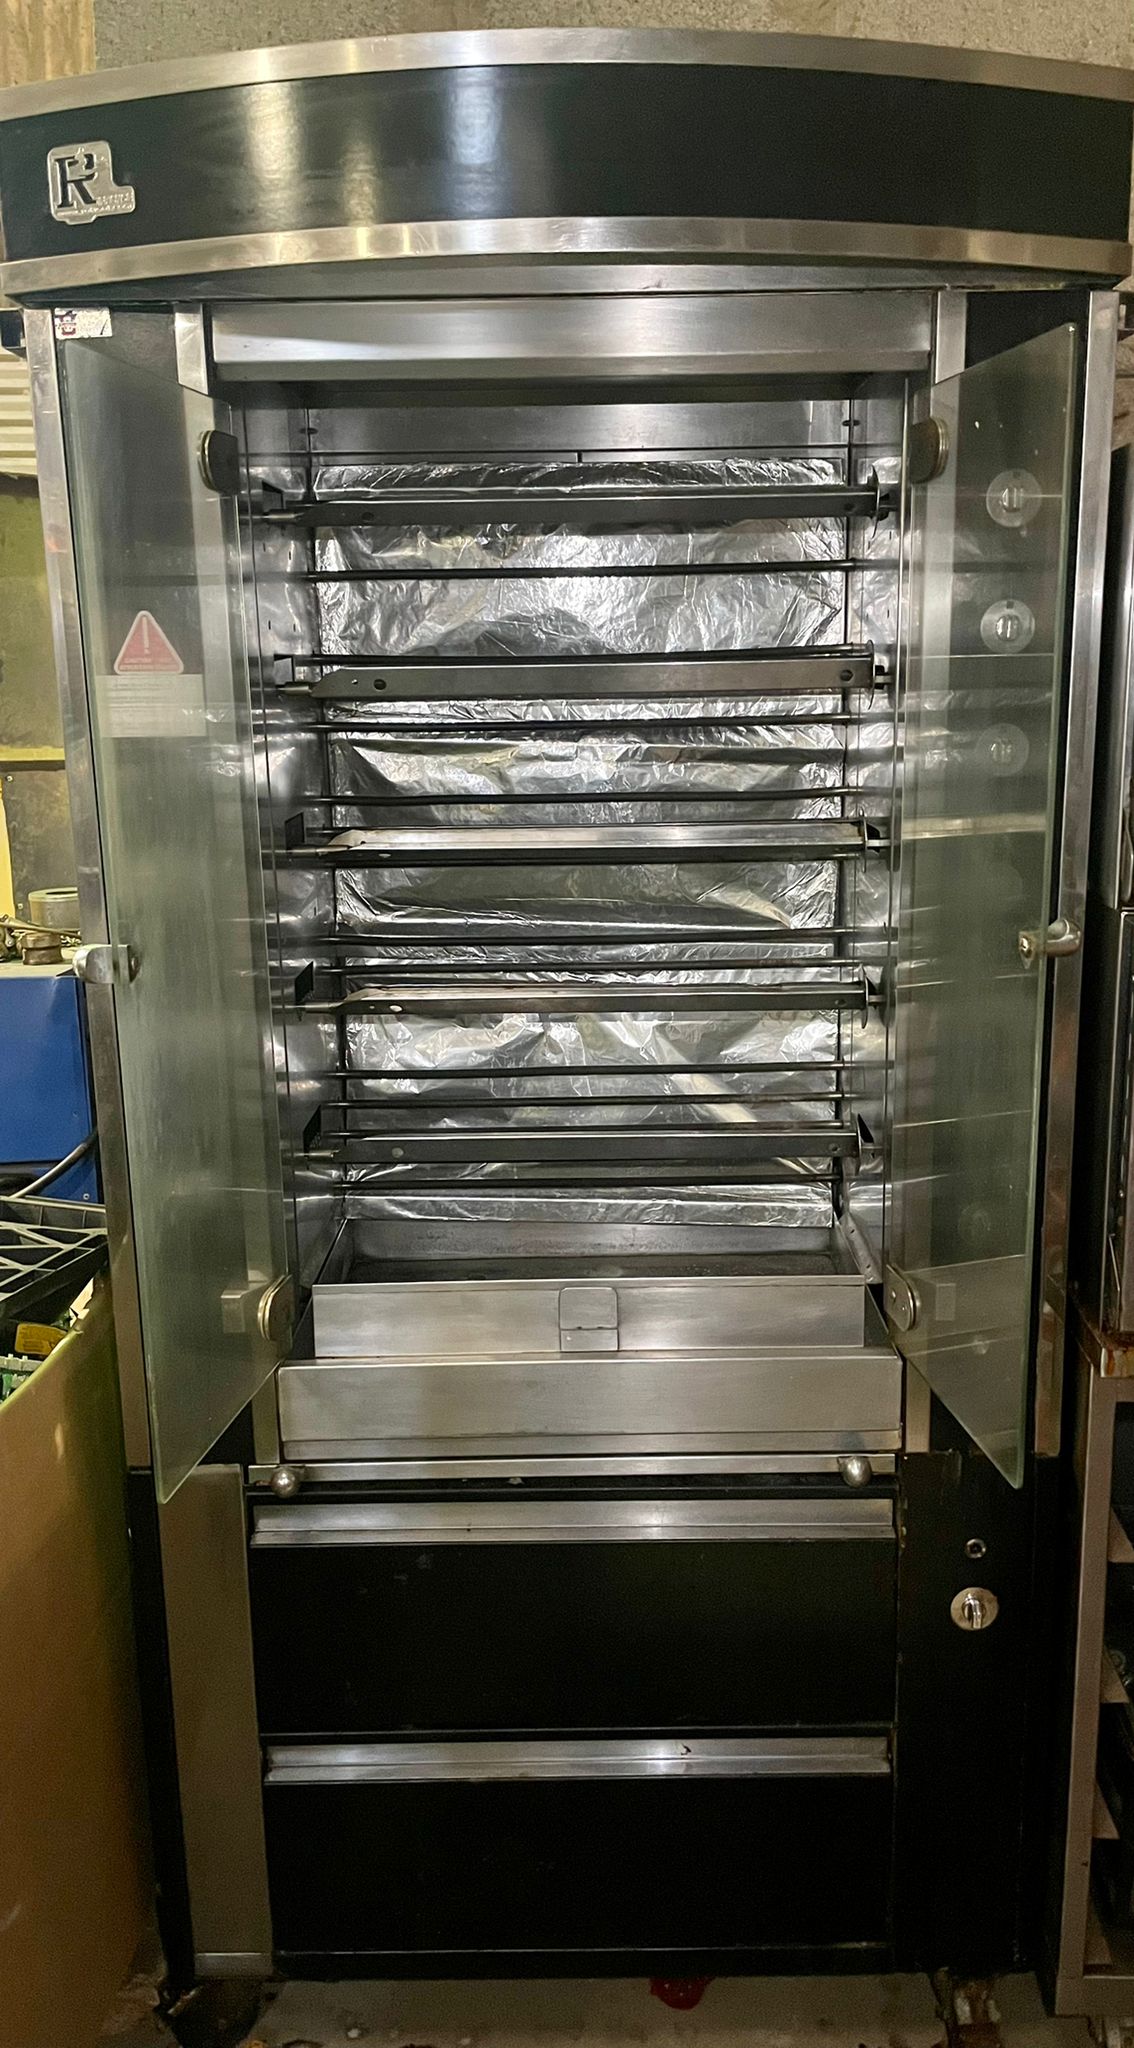 ROTISOL (France) Grande Flamme Electric Rotisserie with Heated Storage Drawers